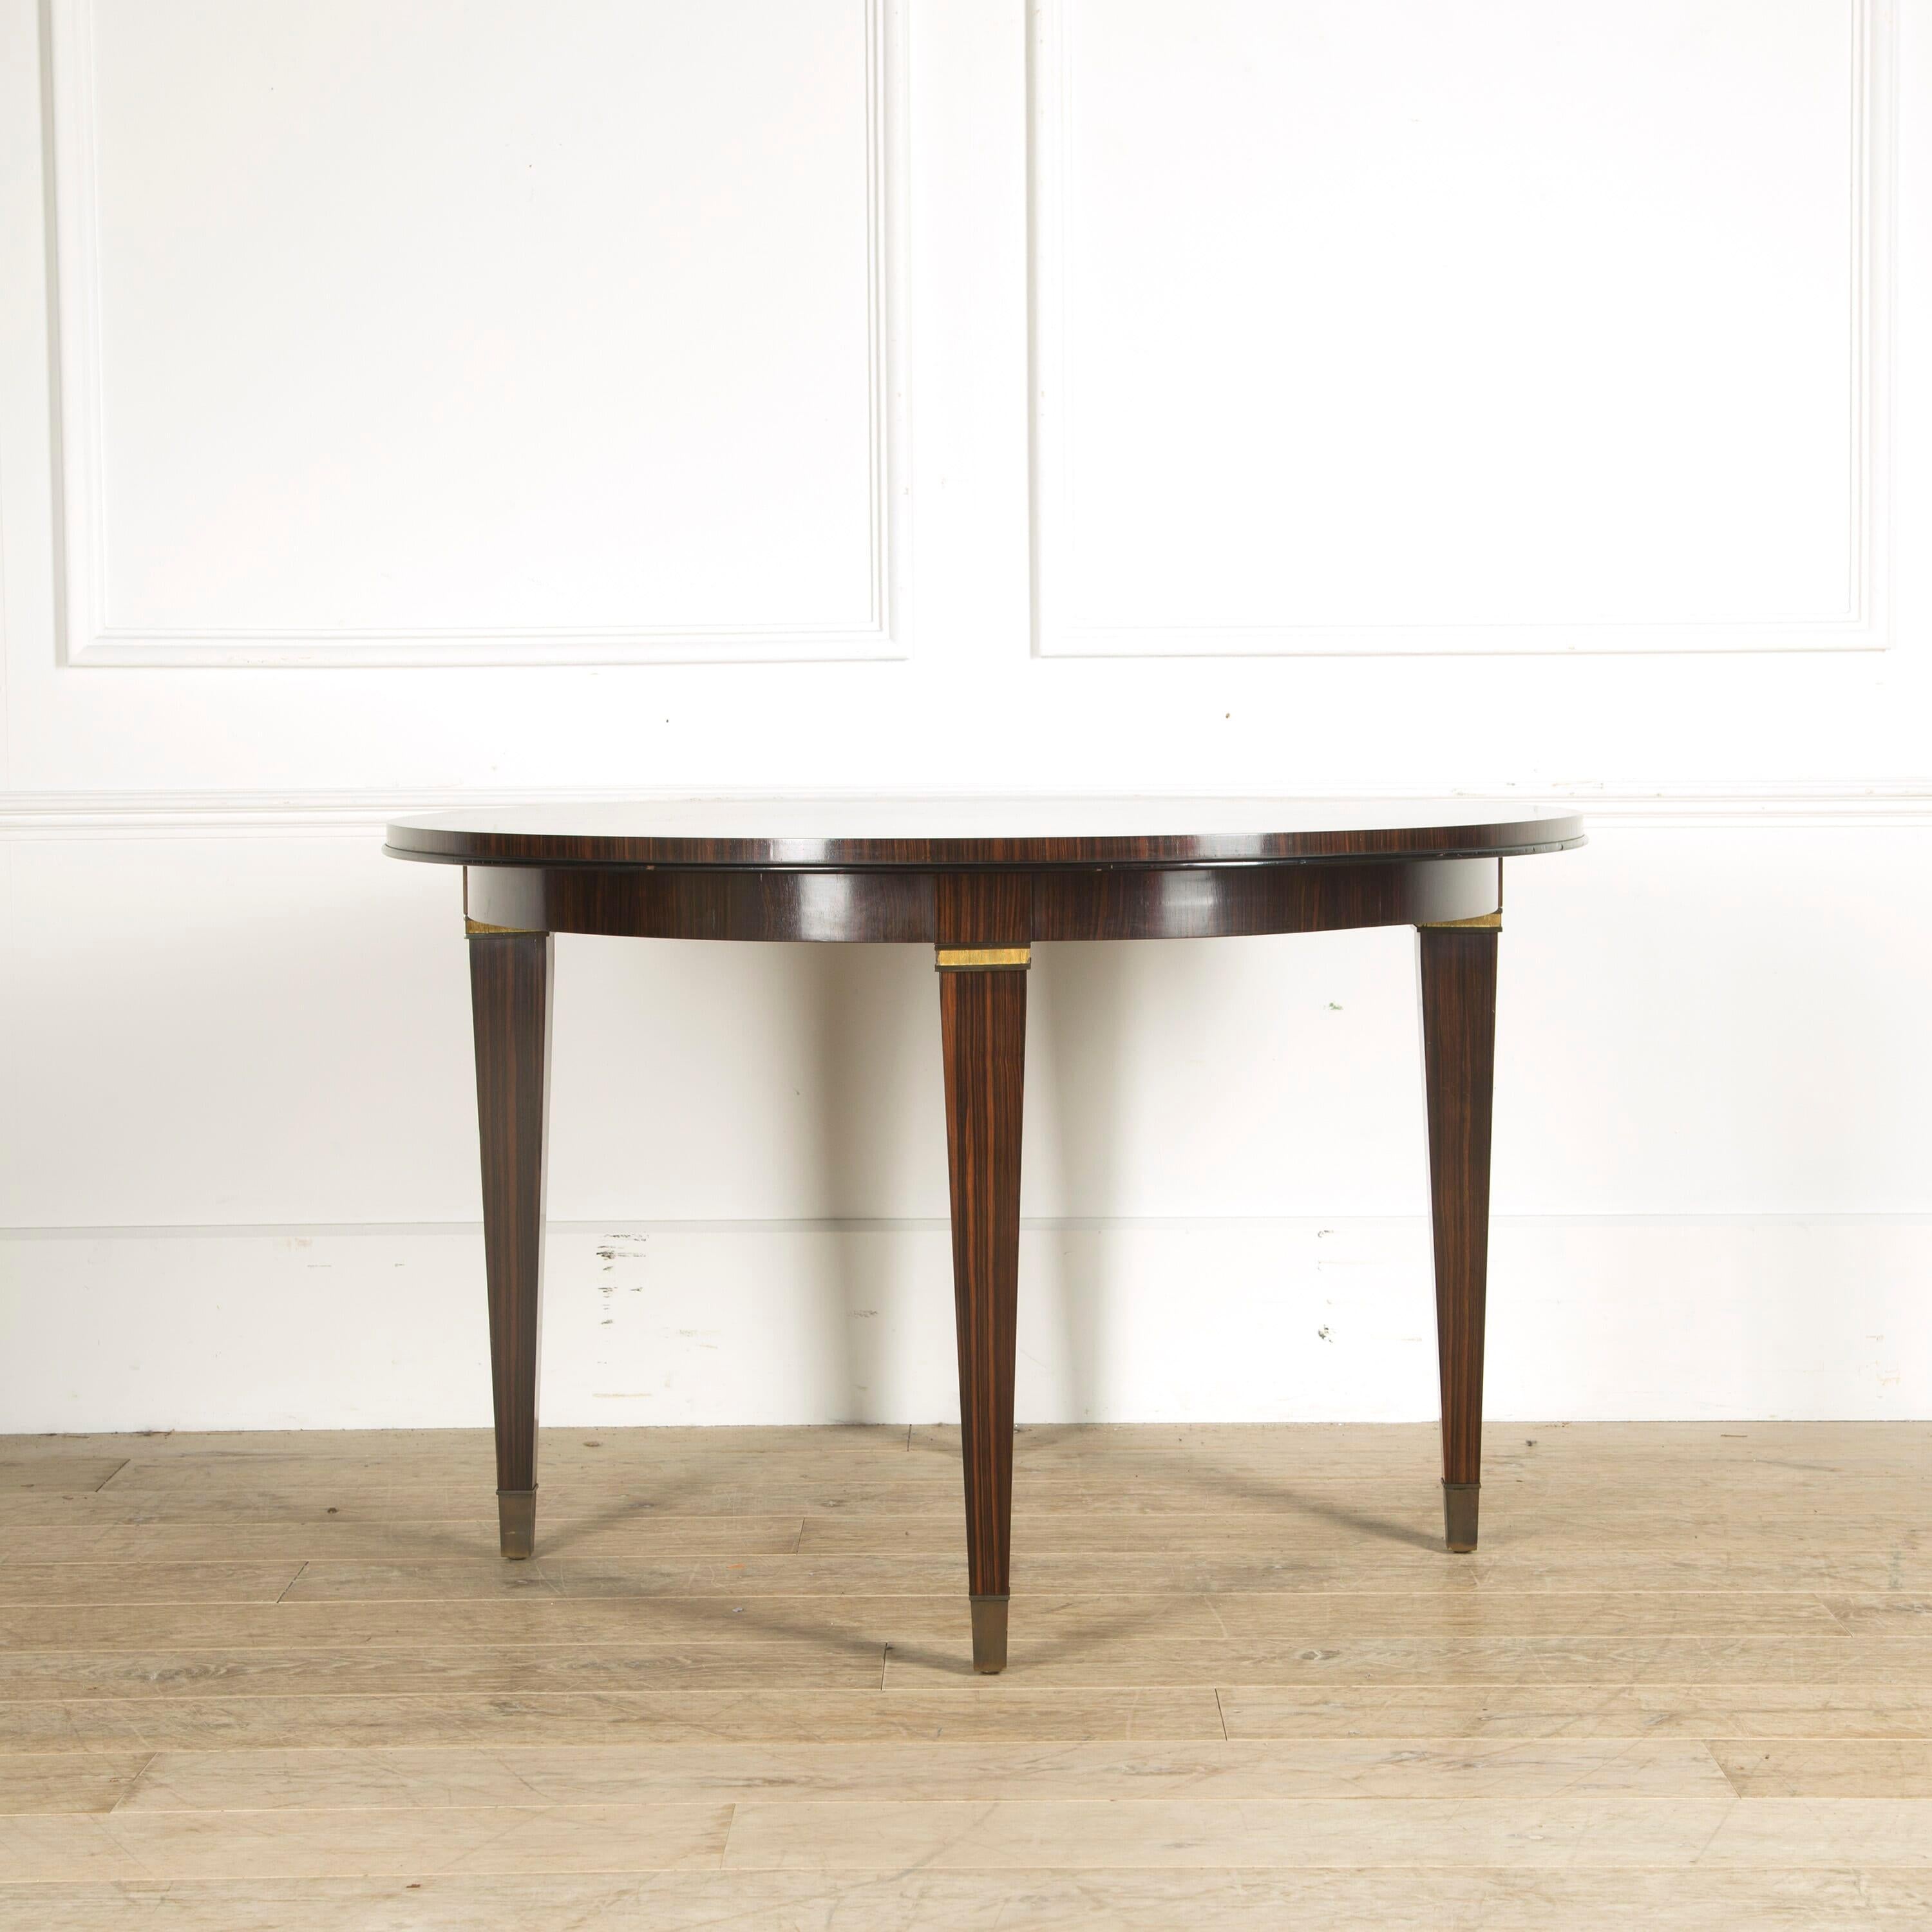 A fine quality and very chic 1950s French centre table, the top radially veneered in Macassar Ebony, the legs veneered in Macassar ebony and terminating in large brass sabots.